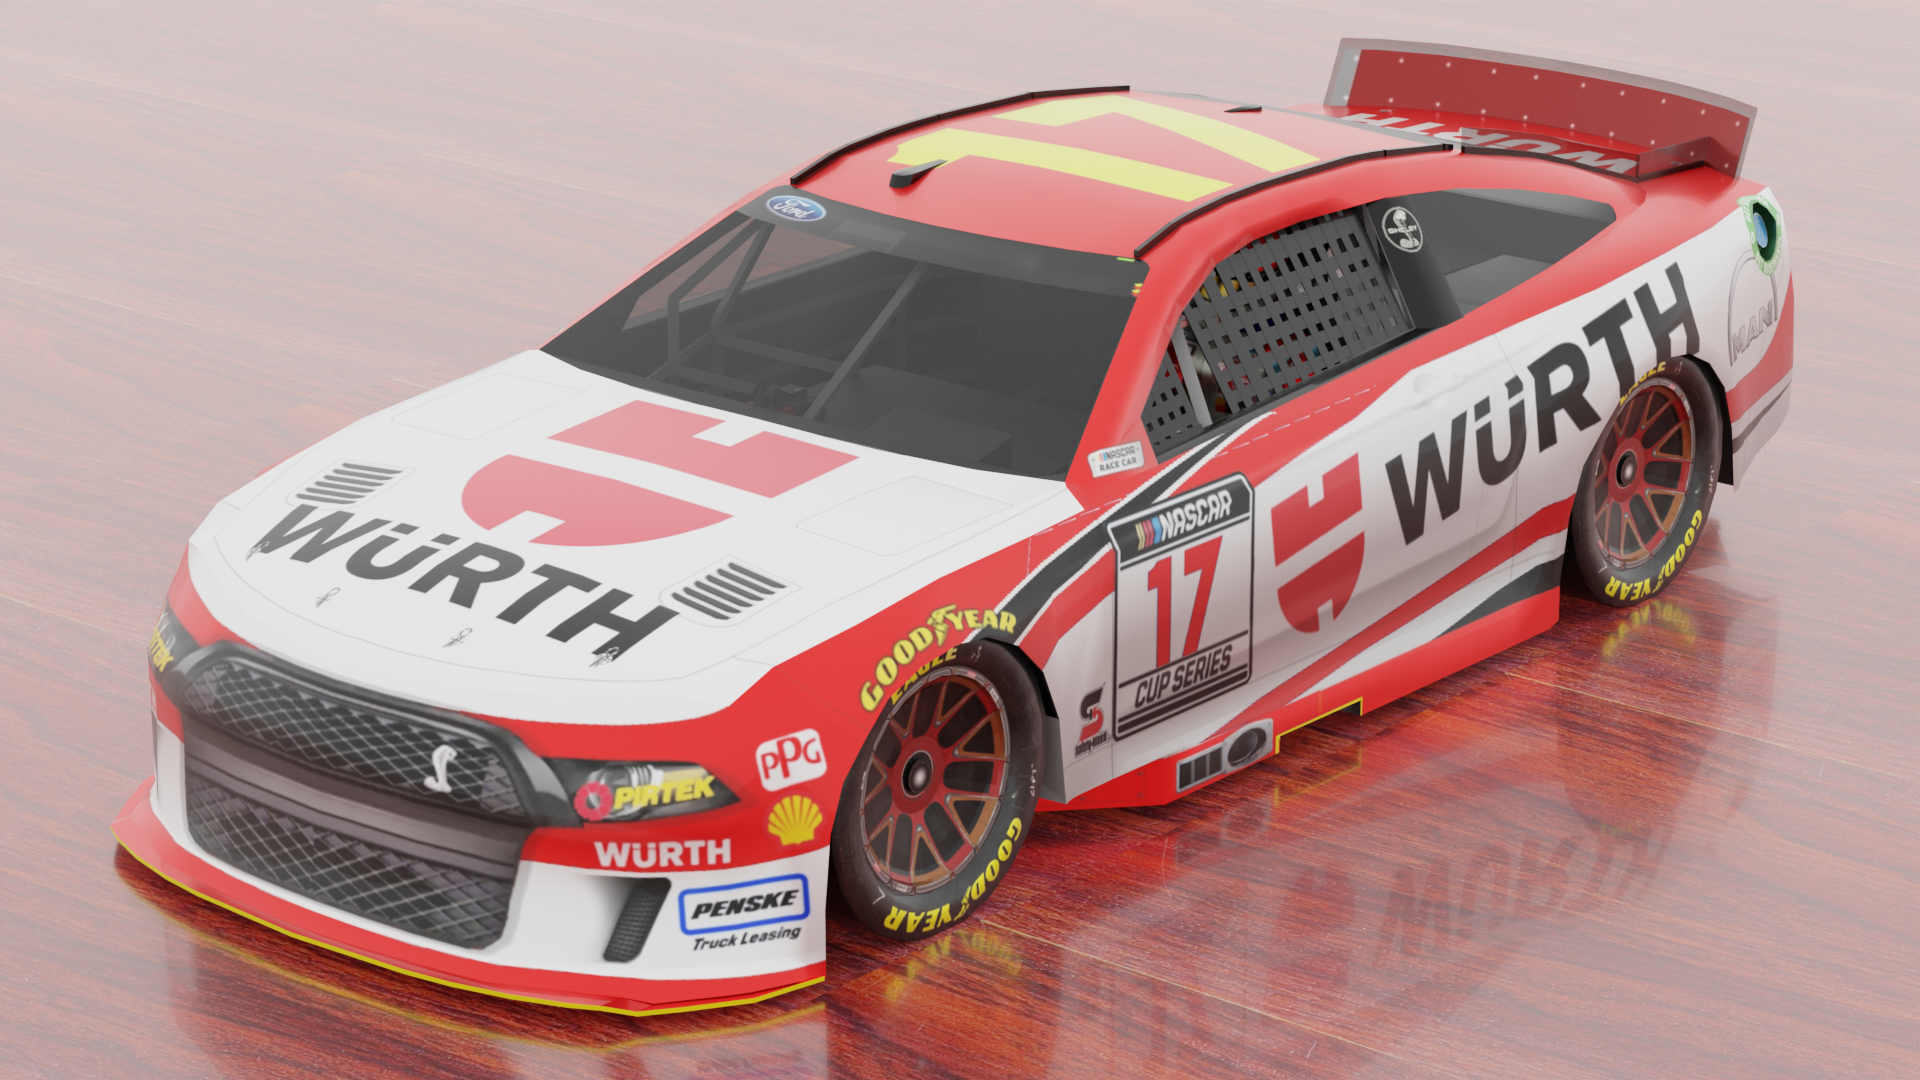 NCS22 #17 wurth render 8.png